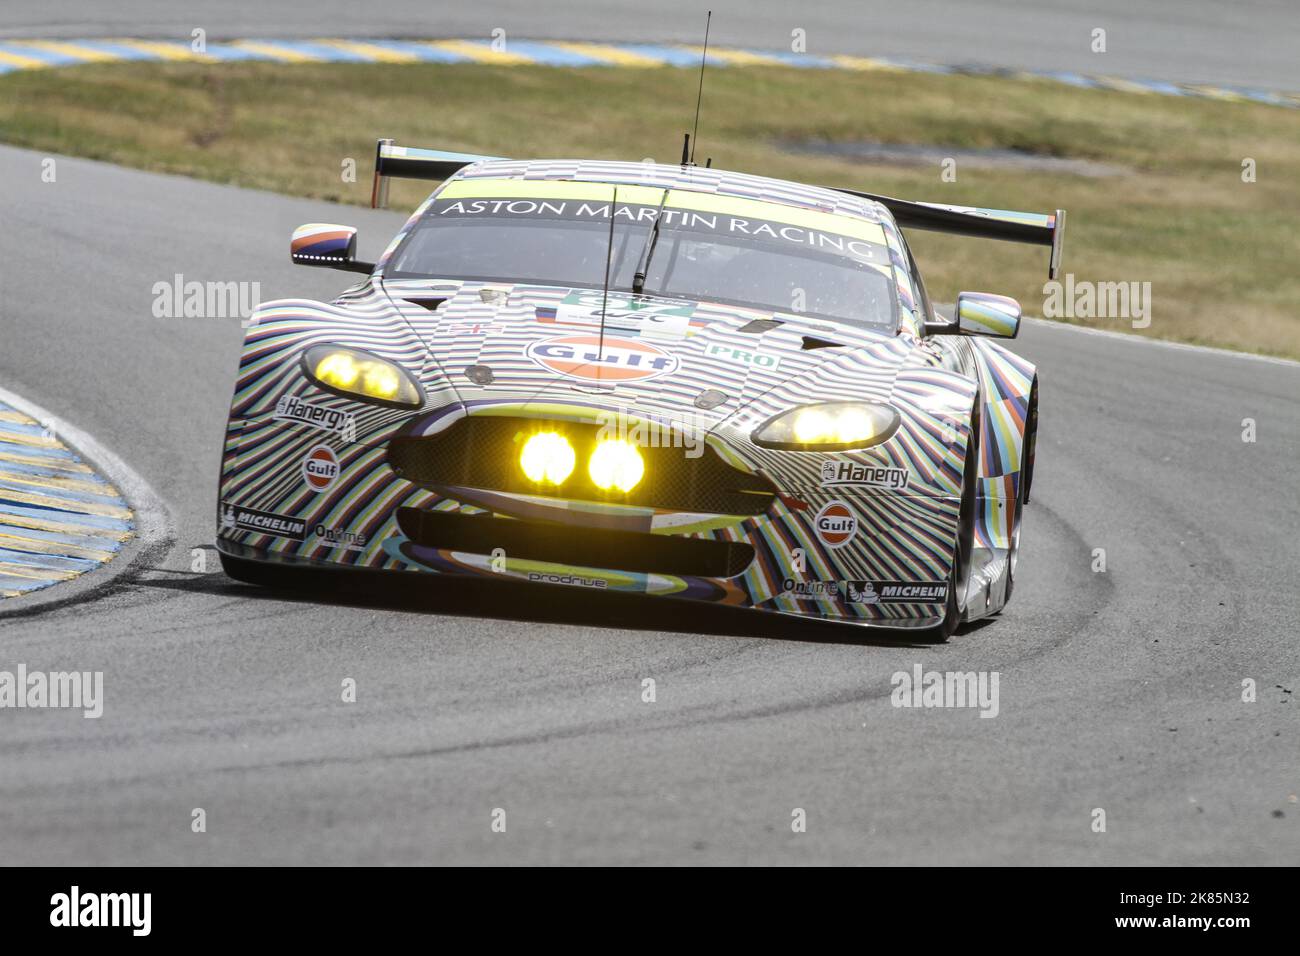 Aston Martin Racing Art Car, which is rumoured to be a 3d design, at the Le Mans 24 Hours 2015 driven by Darren Turner, Stefan Mucke & Rob Bell Stock Photo